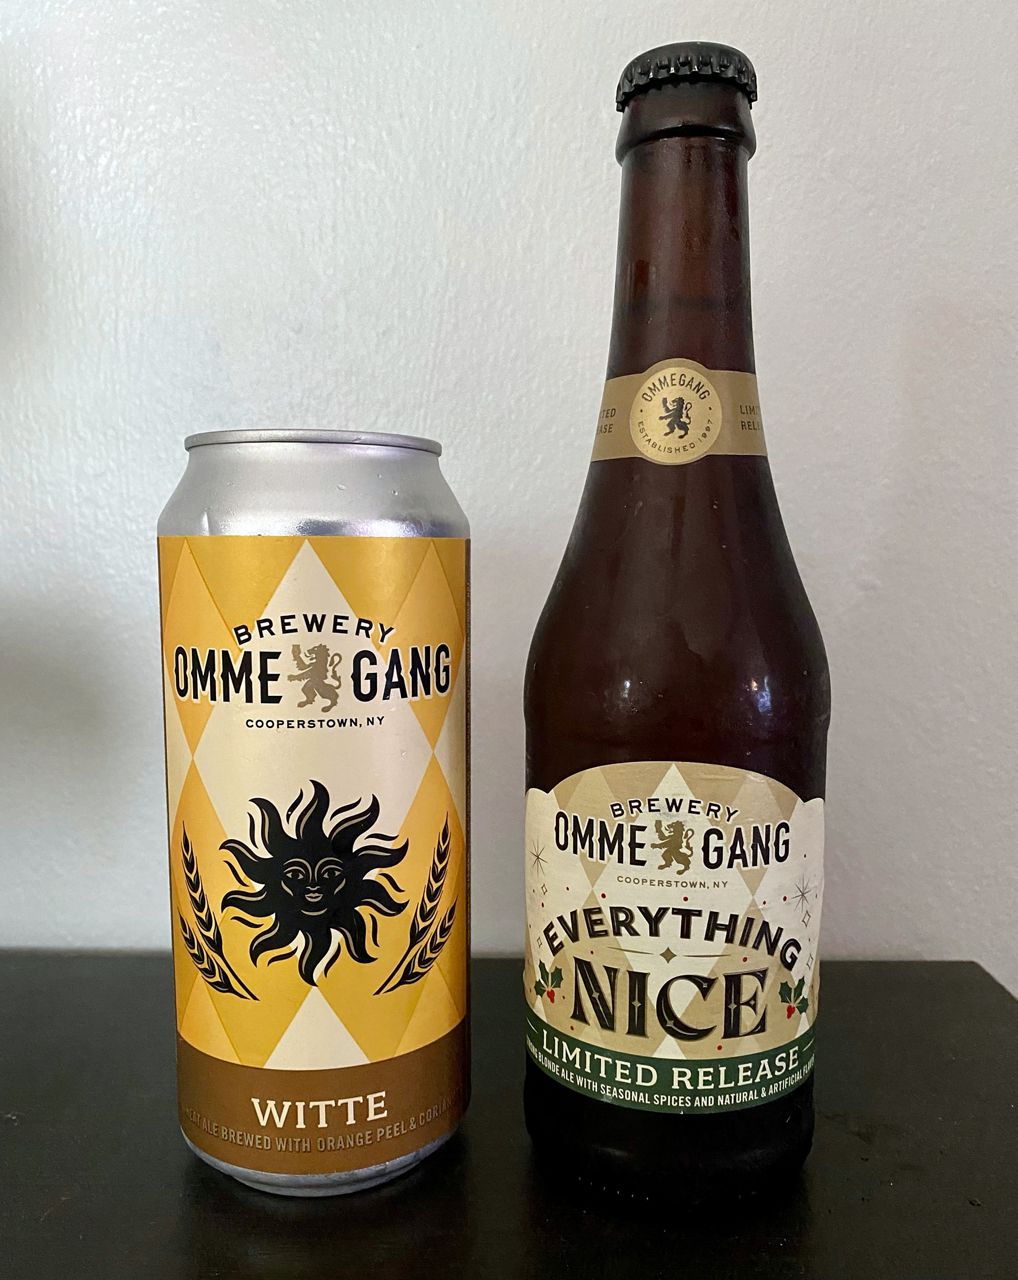 Two Brewery Ommegang beers